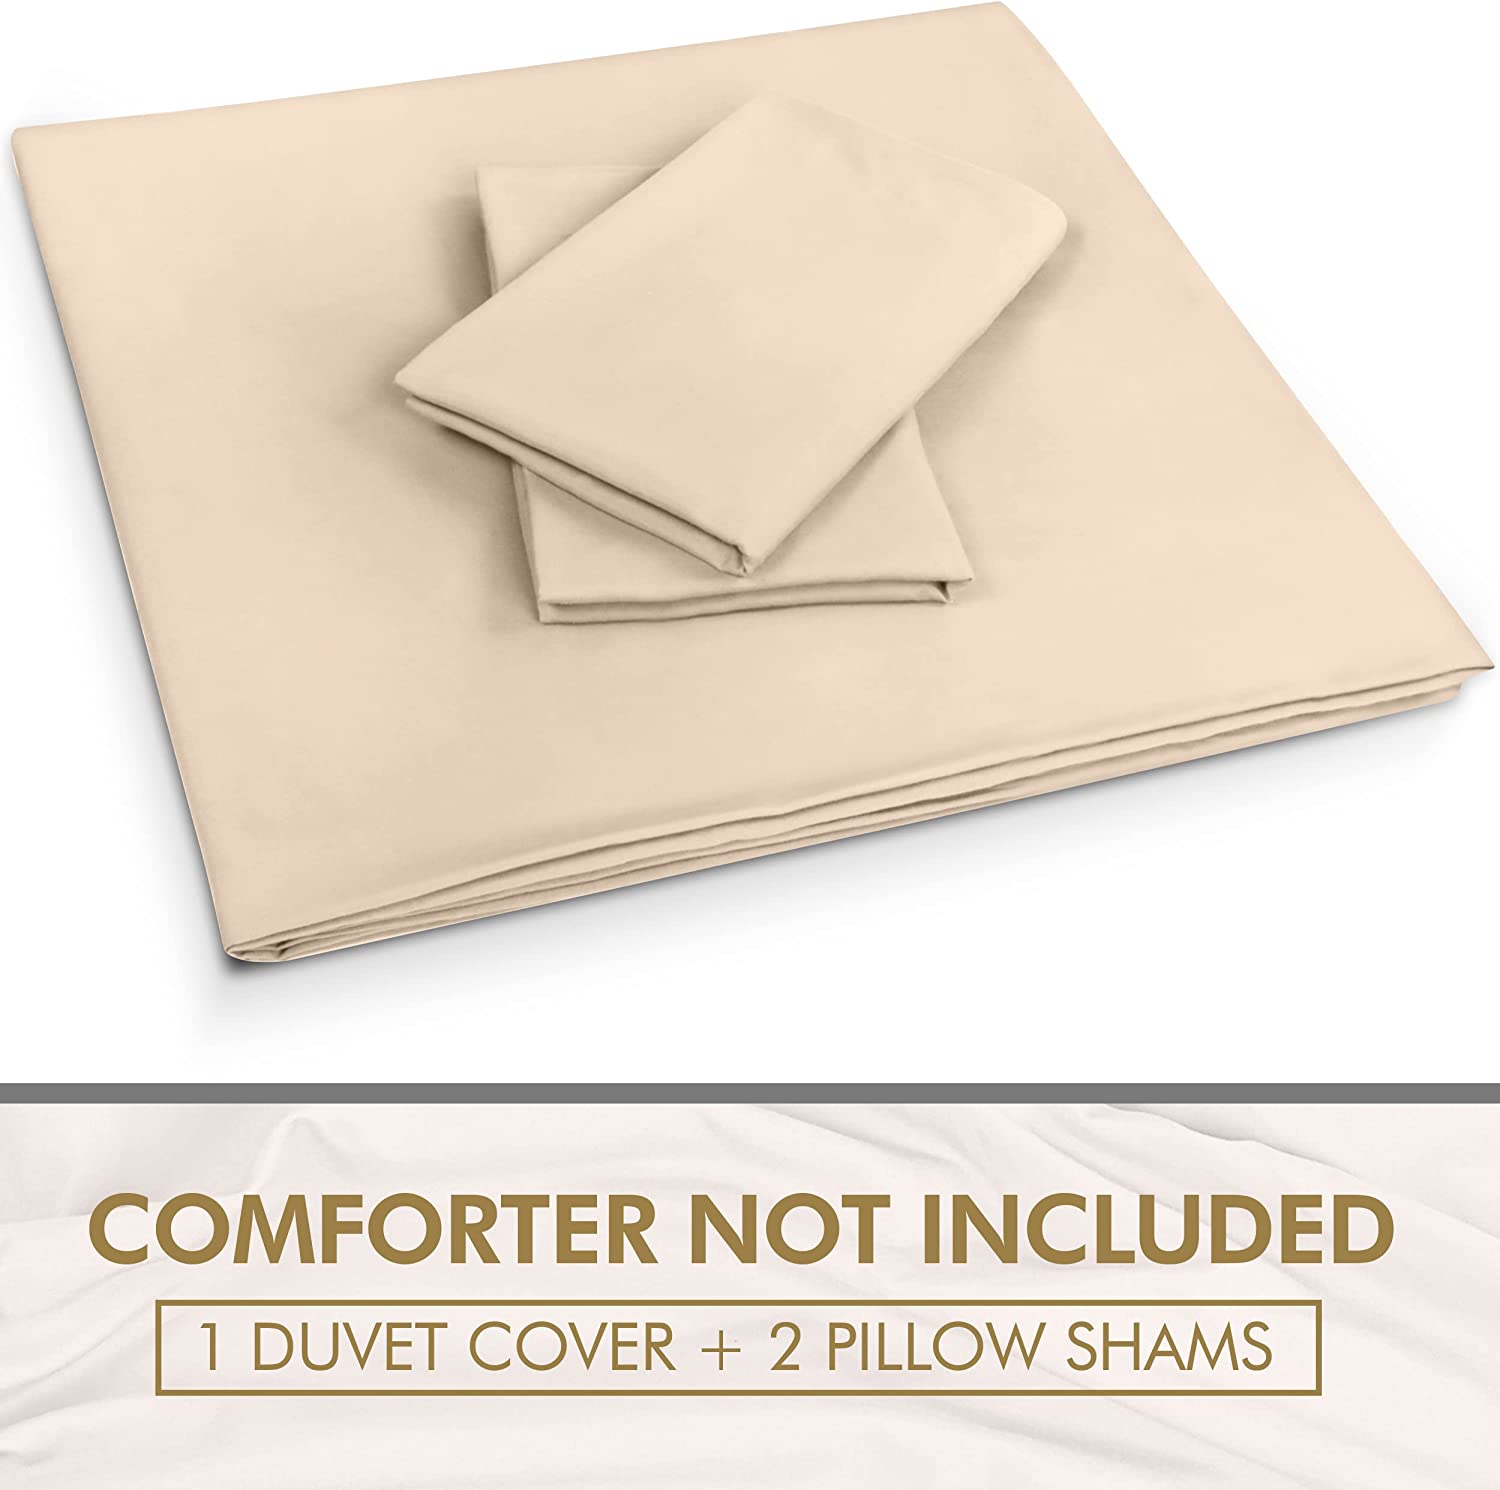 Duvet Cover King Size Set - 1 Duvet Cover with 2 Pillow Shams - 3 Pieces Comforter Cover with Zipper Closure - Ultra Soft Brushed - Beige